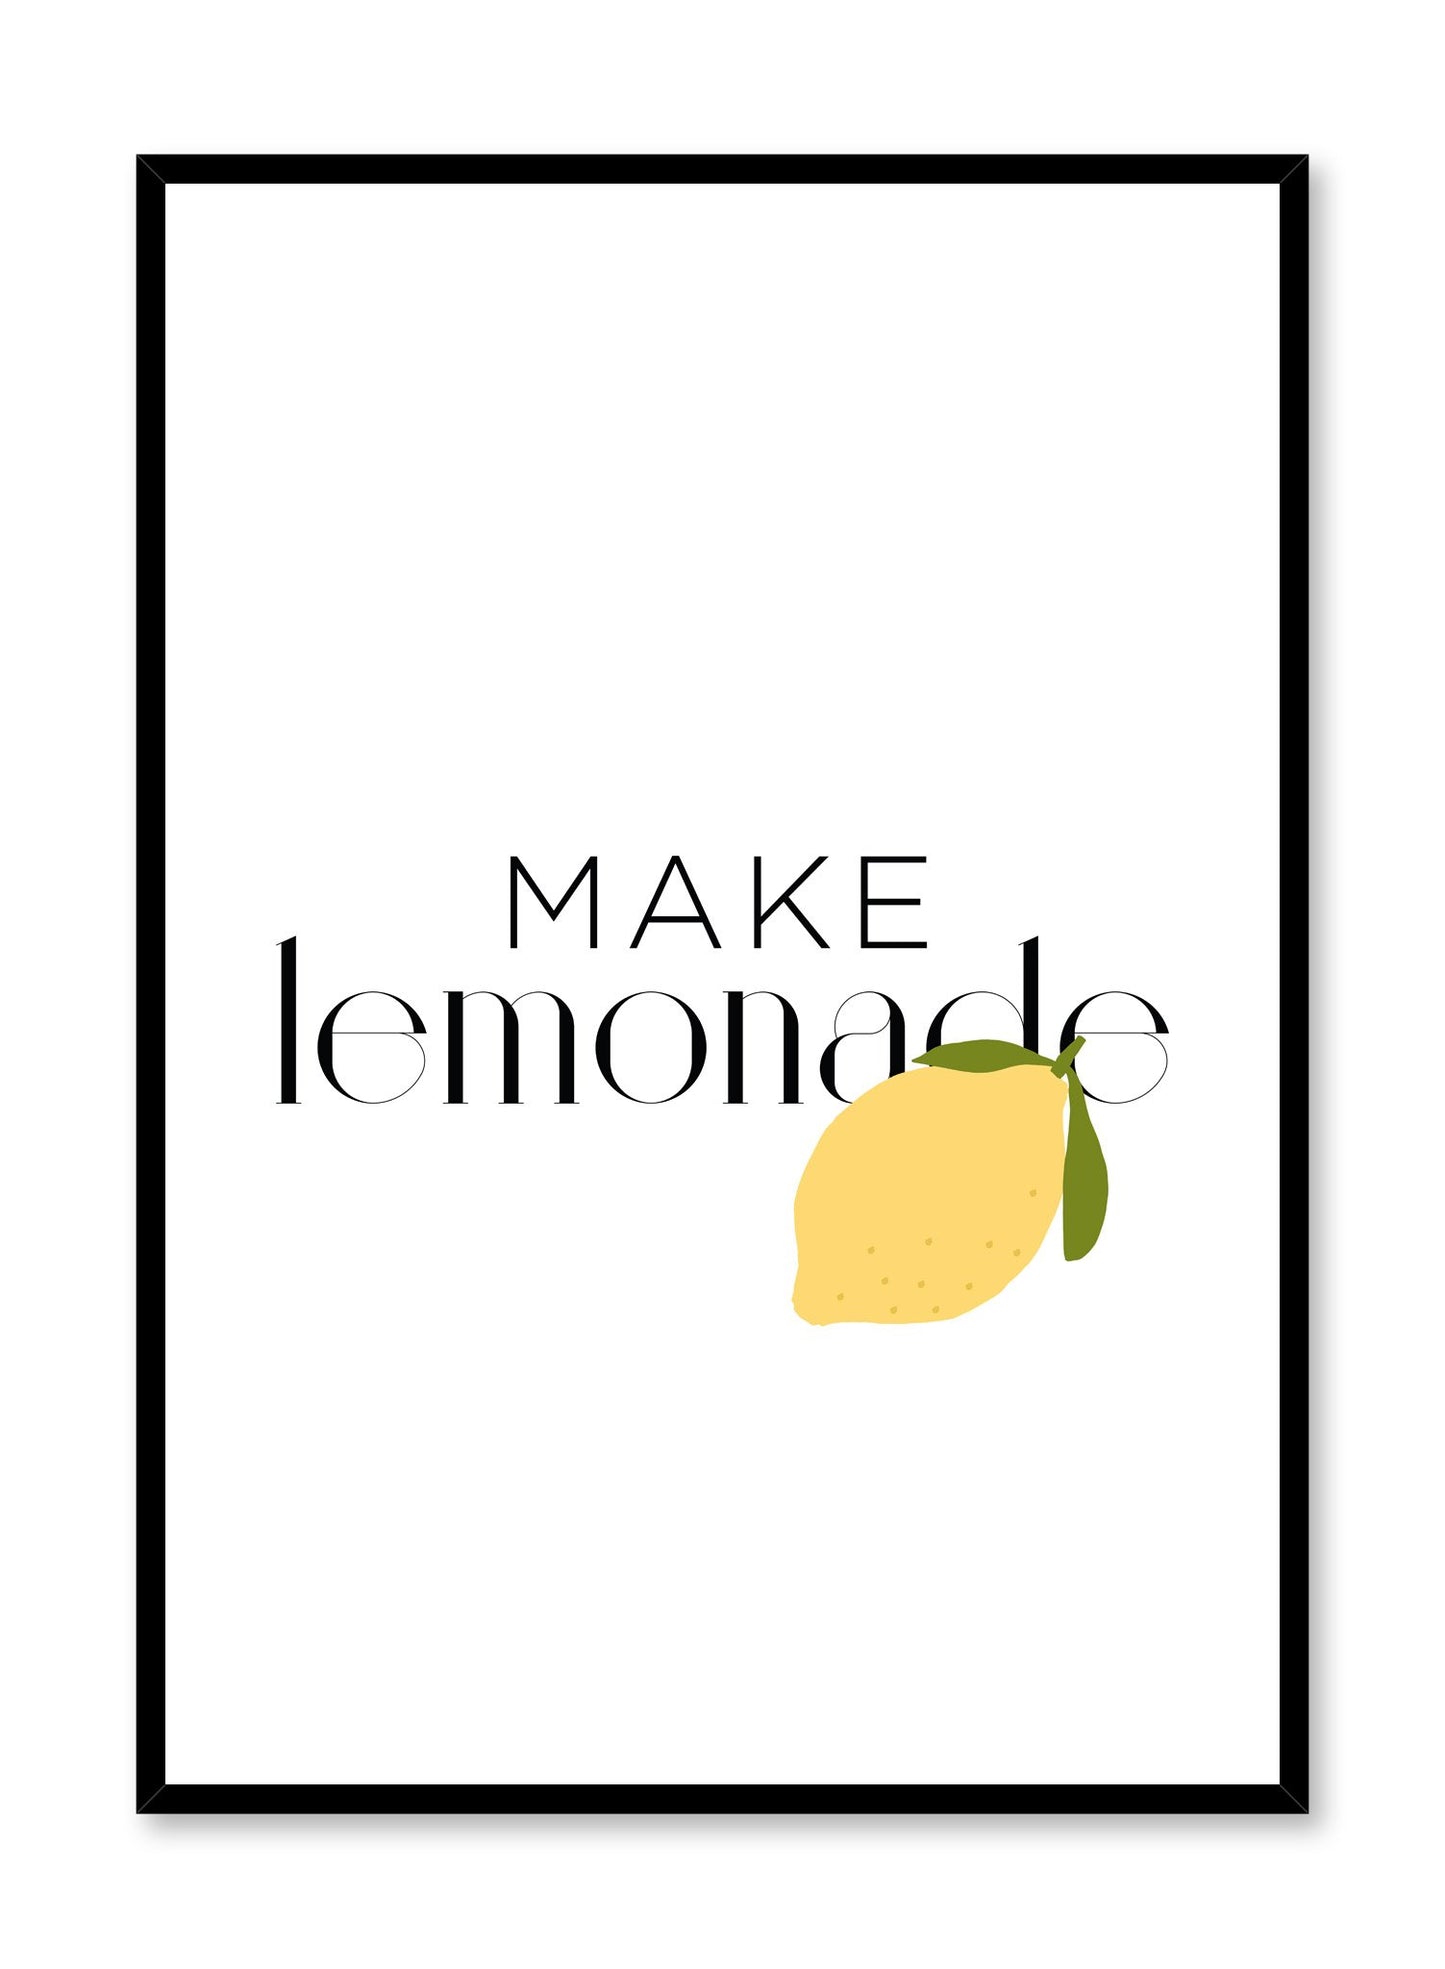 Lemonade is an inspirational typography and lemon illustration poster by Opposite Wall.